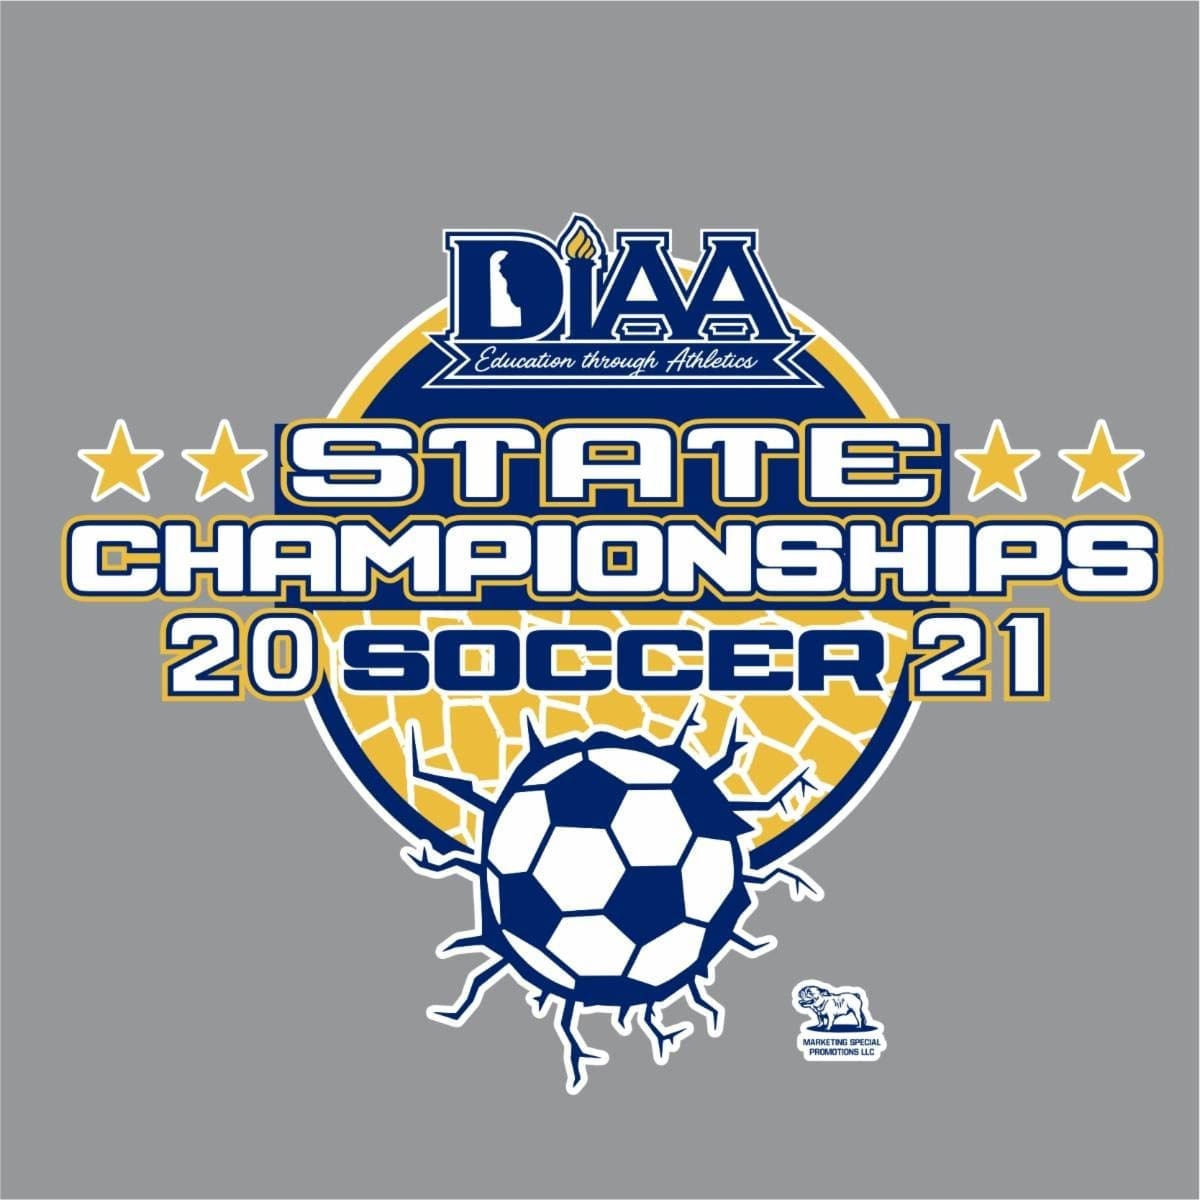 Featured image for “2021 DIAA boys soccer state championship brackets”